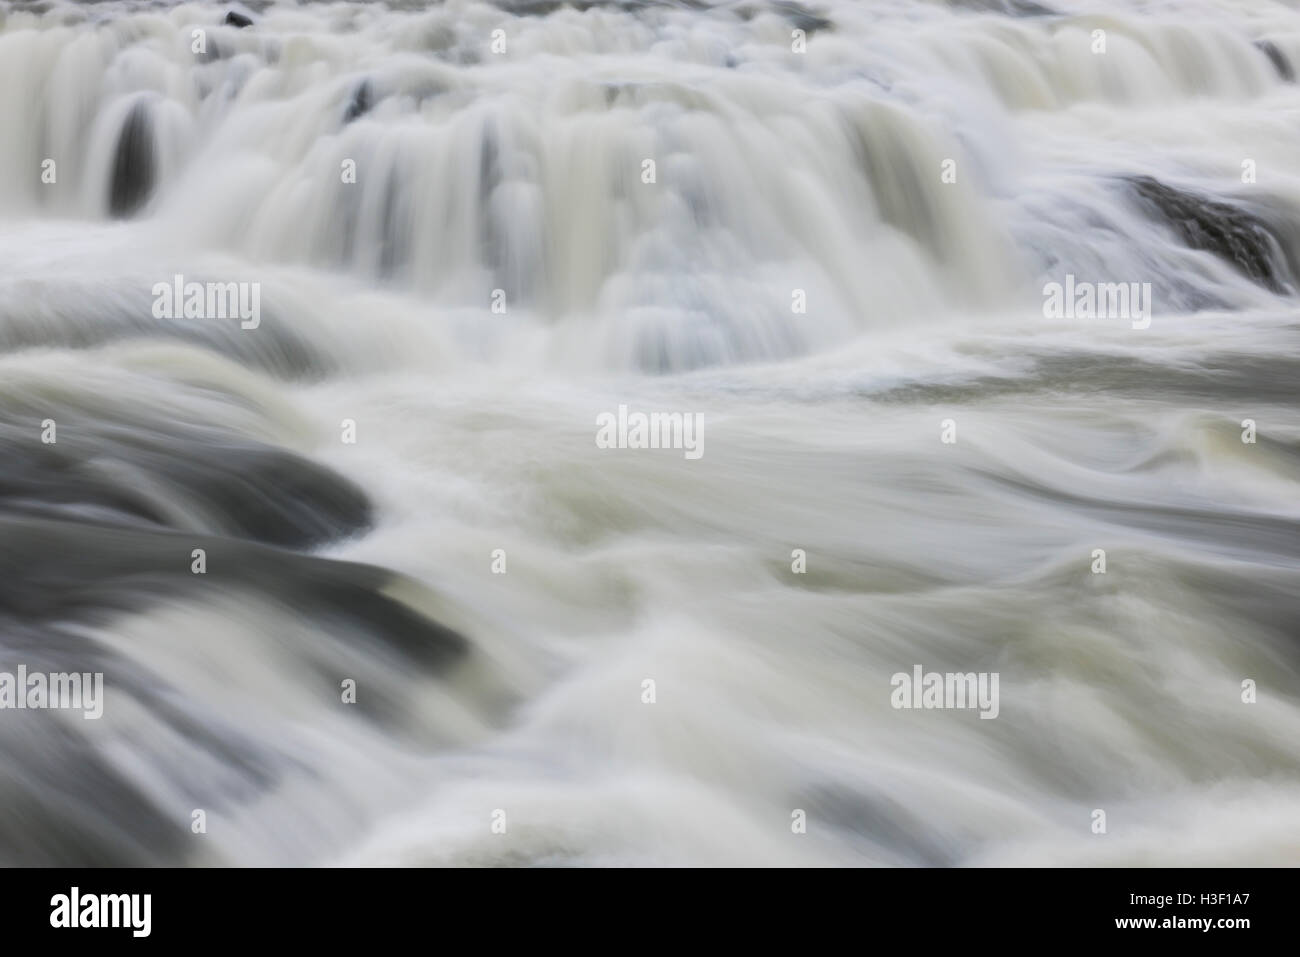 Part of the Gullfoss Waterfall of the Hvita river in Iceland. Stock Photo